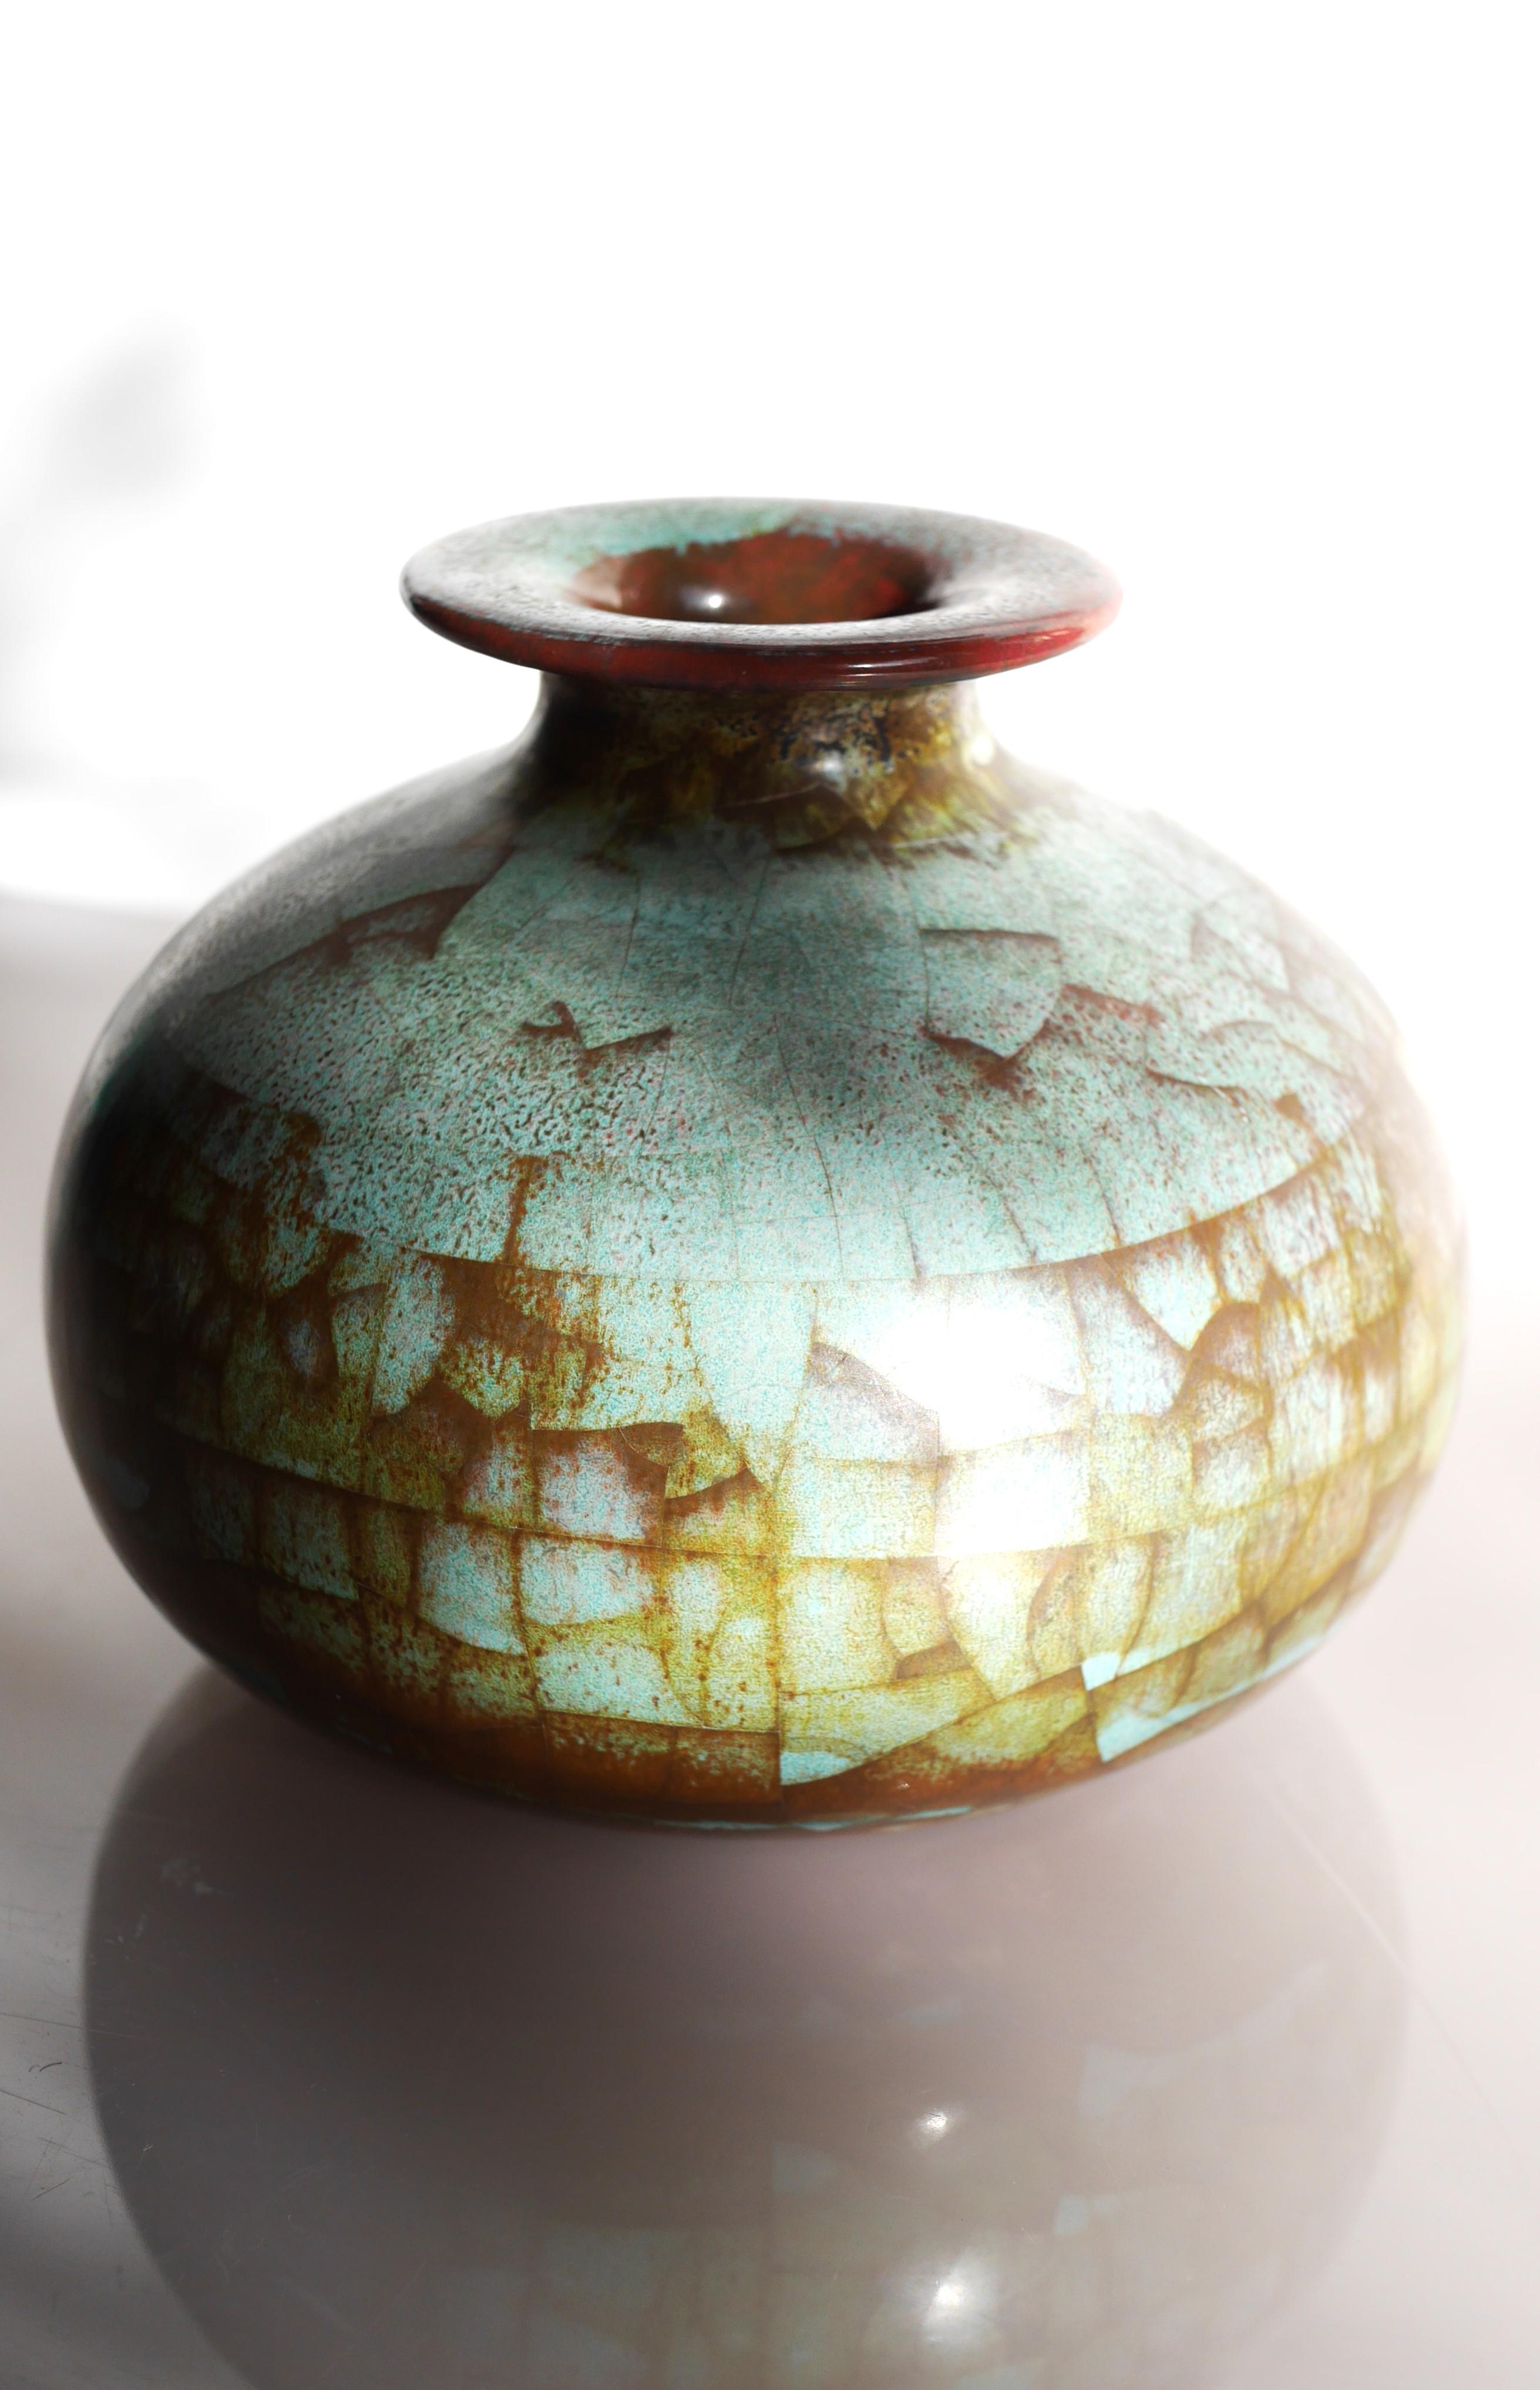 An extraordinary vintage ceramic vase with Persia glaze from Michael Andersen, Bornholm, Denmark. An unusual and stunning ceramic vase with fantastic colors with parts of if being a pale green color matched with a bronze brown tones in a patchy